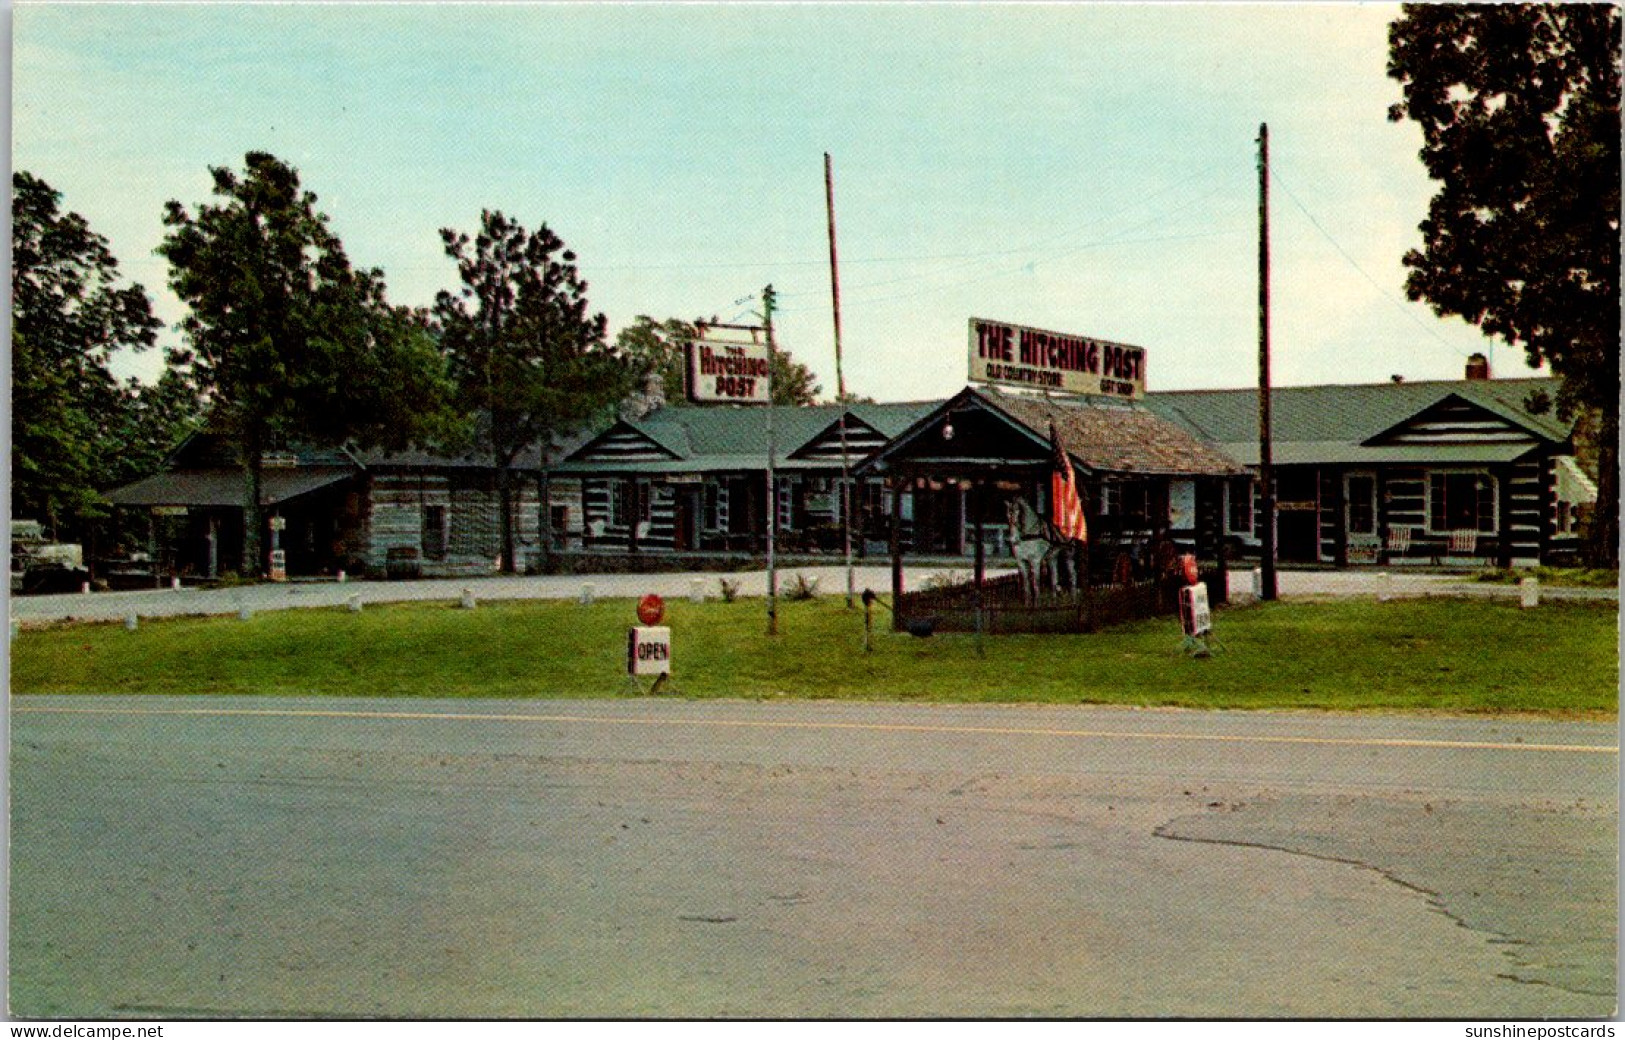 Kentucky Hardin The Hitching Post Gift Shop And Old Country Store - Bowling Green